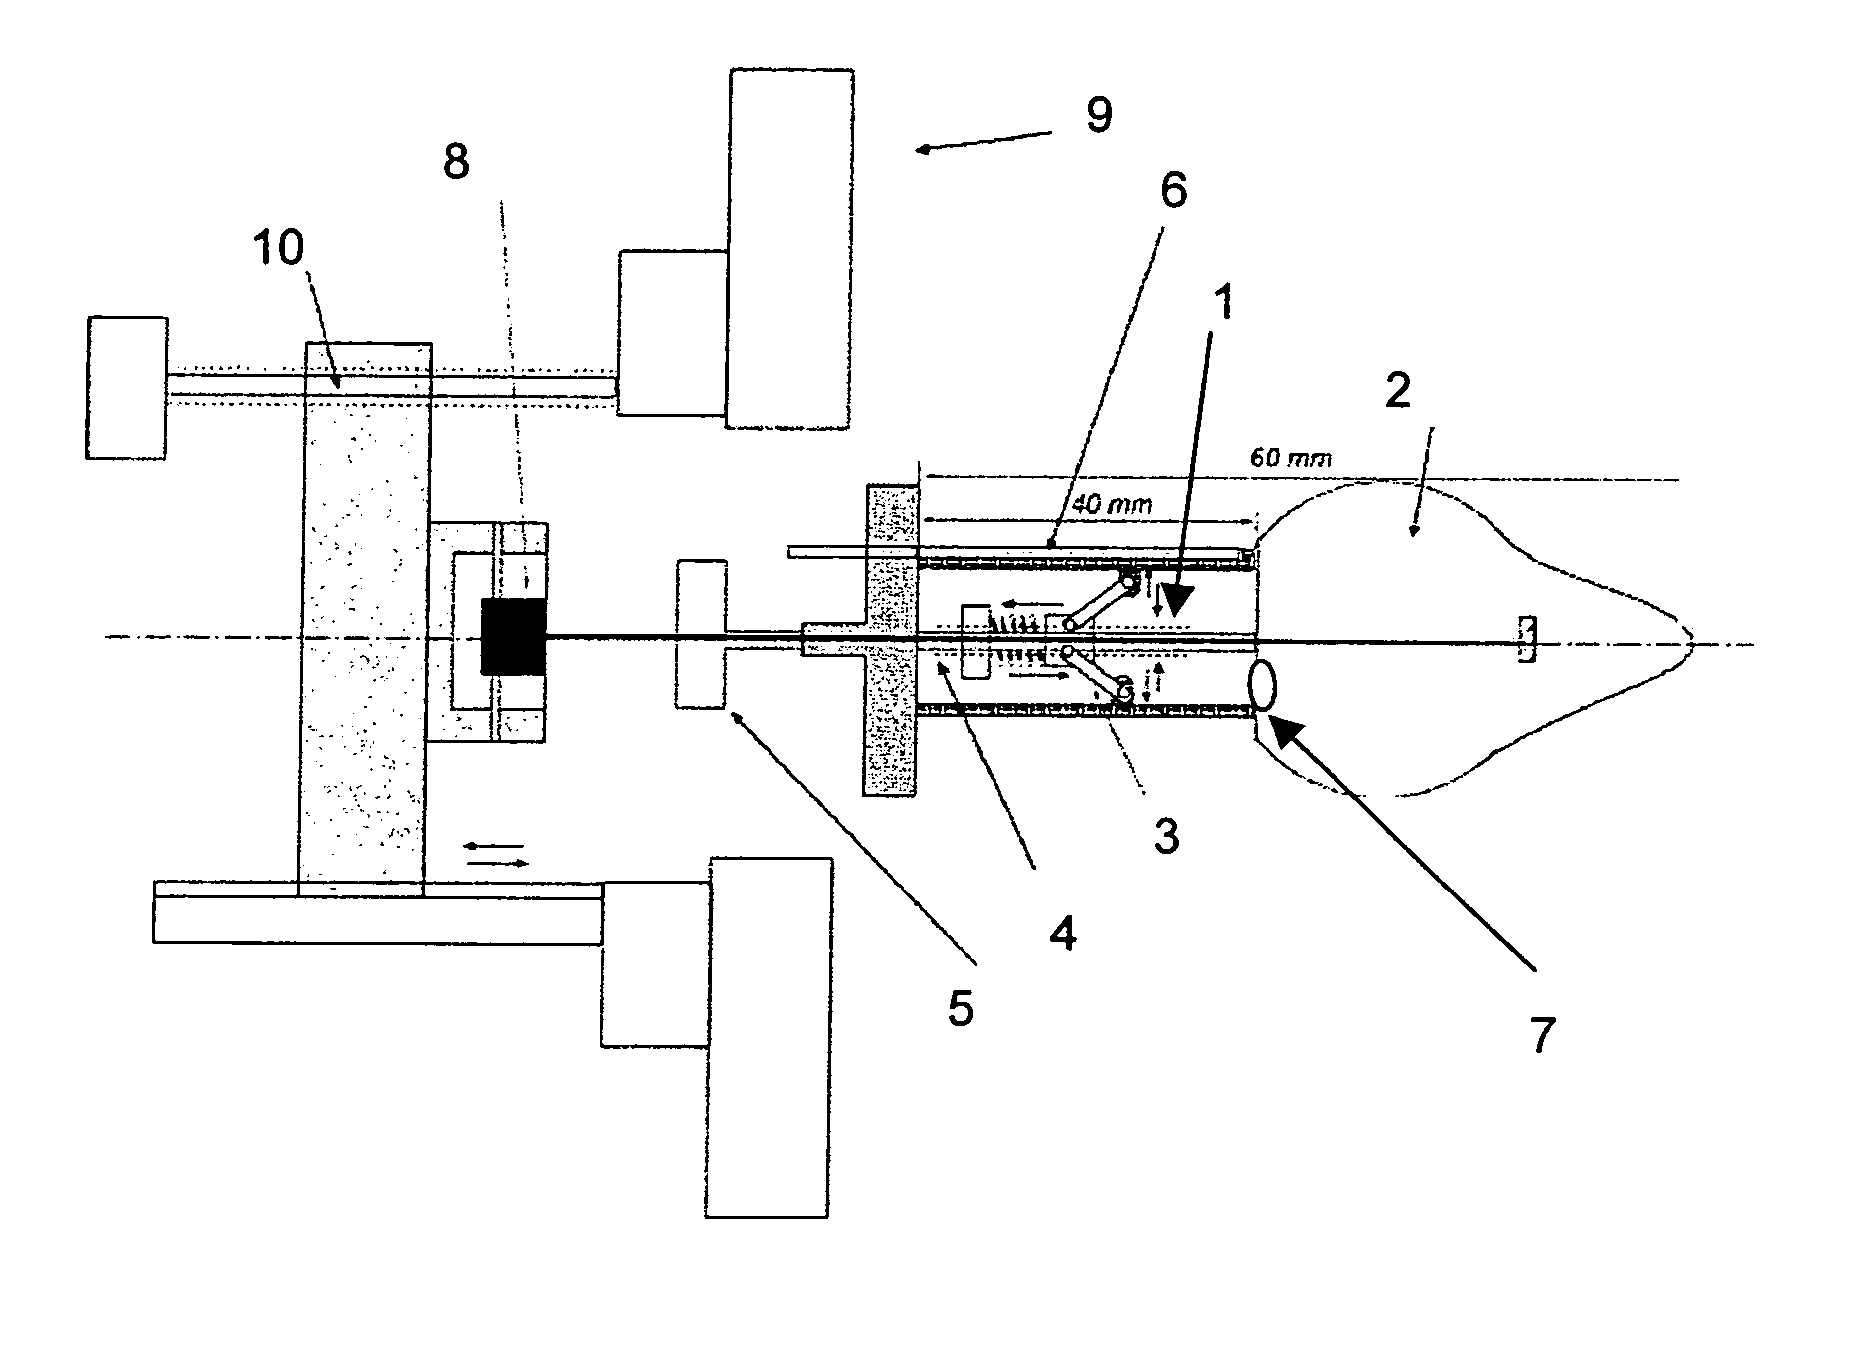 Pelvic floor function diagnostic and therapeutic station and uses thereof